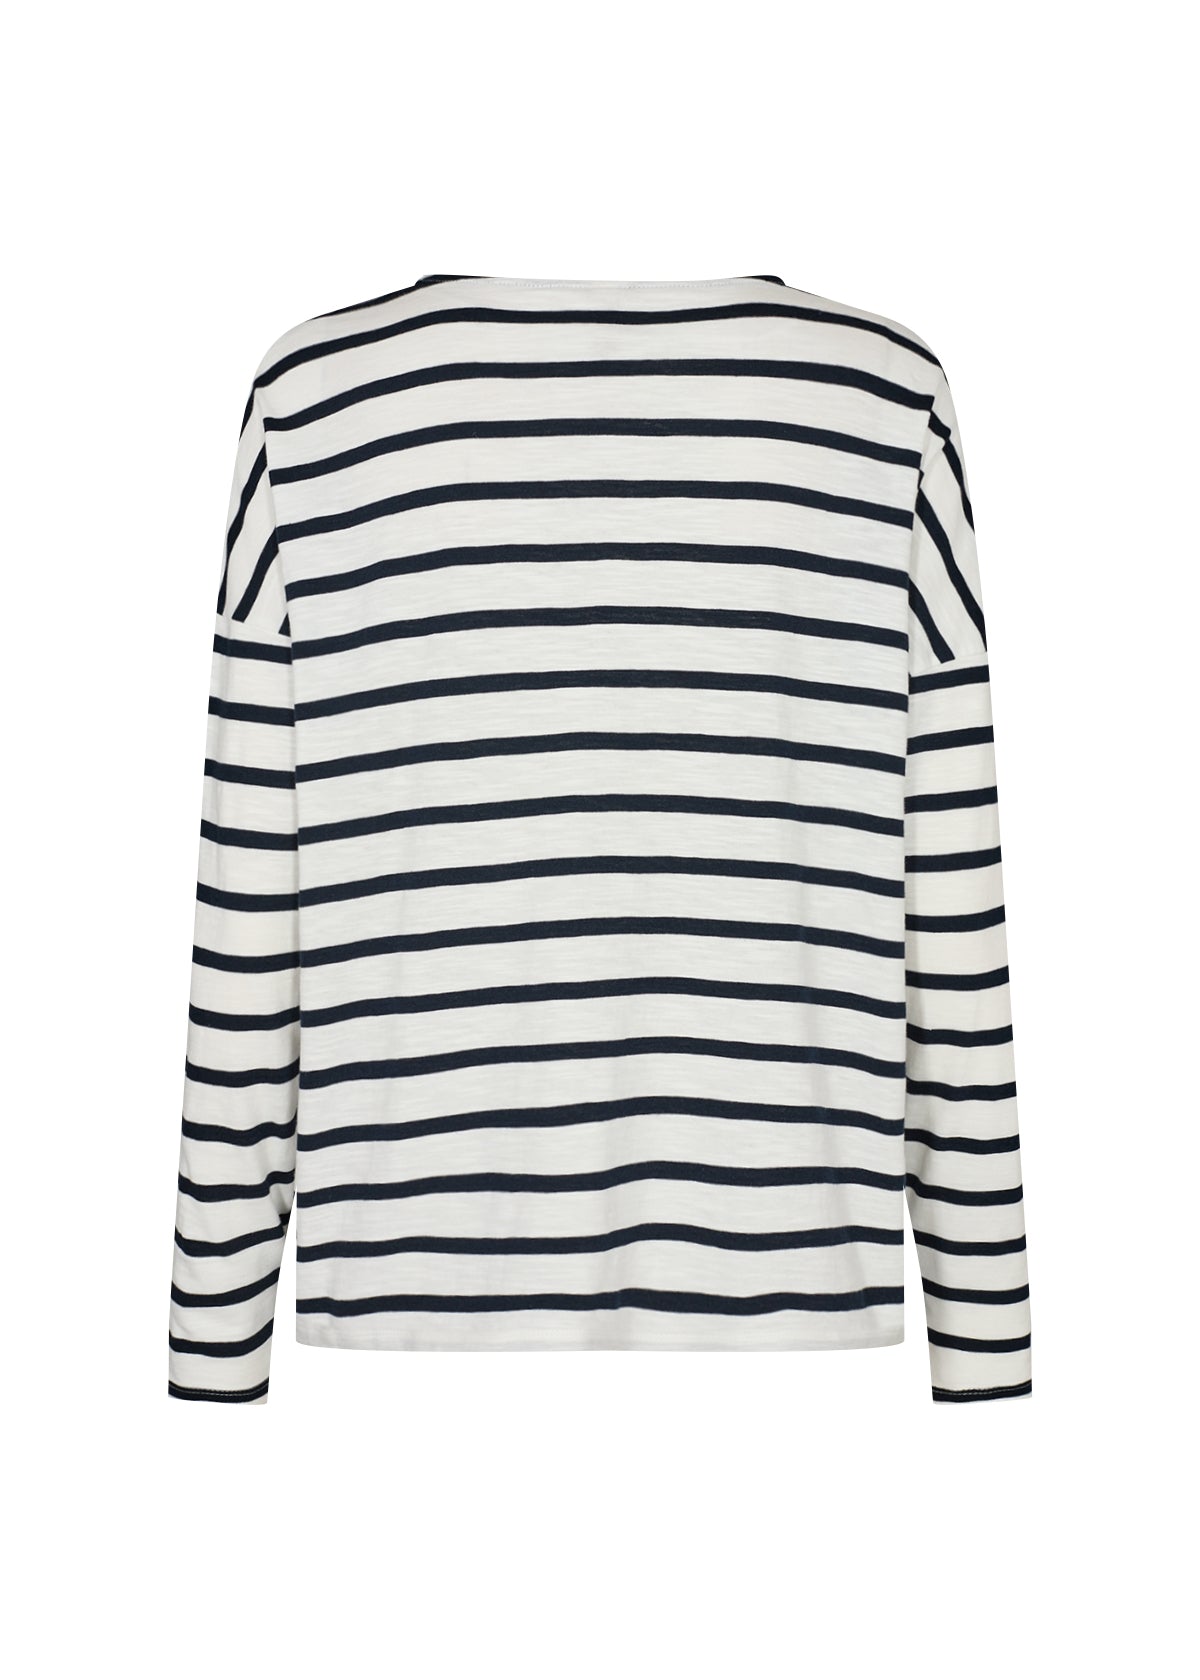 Soyaconcept - Camelia 2 Long Sleeve in Navy*